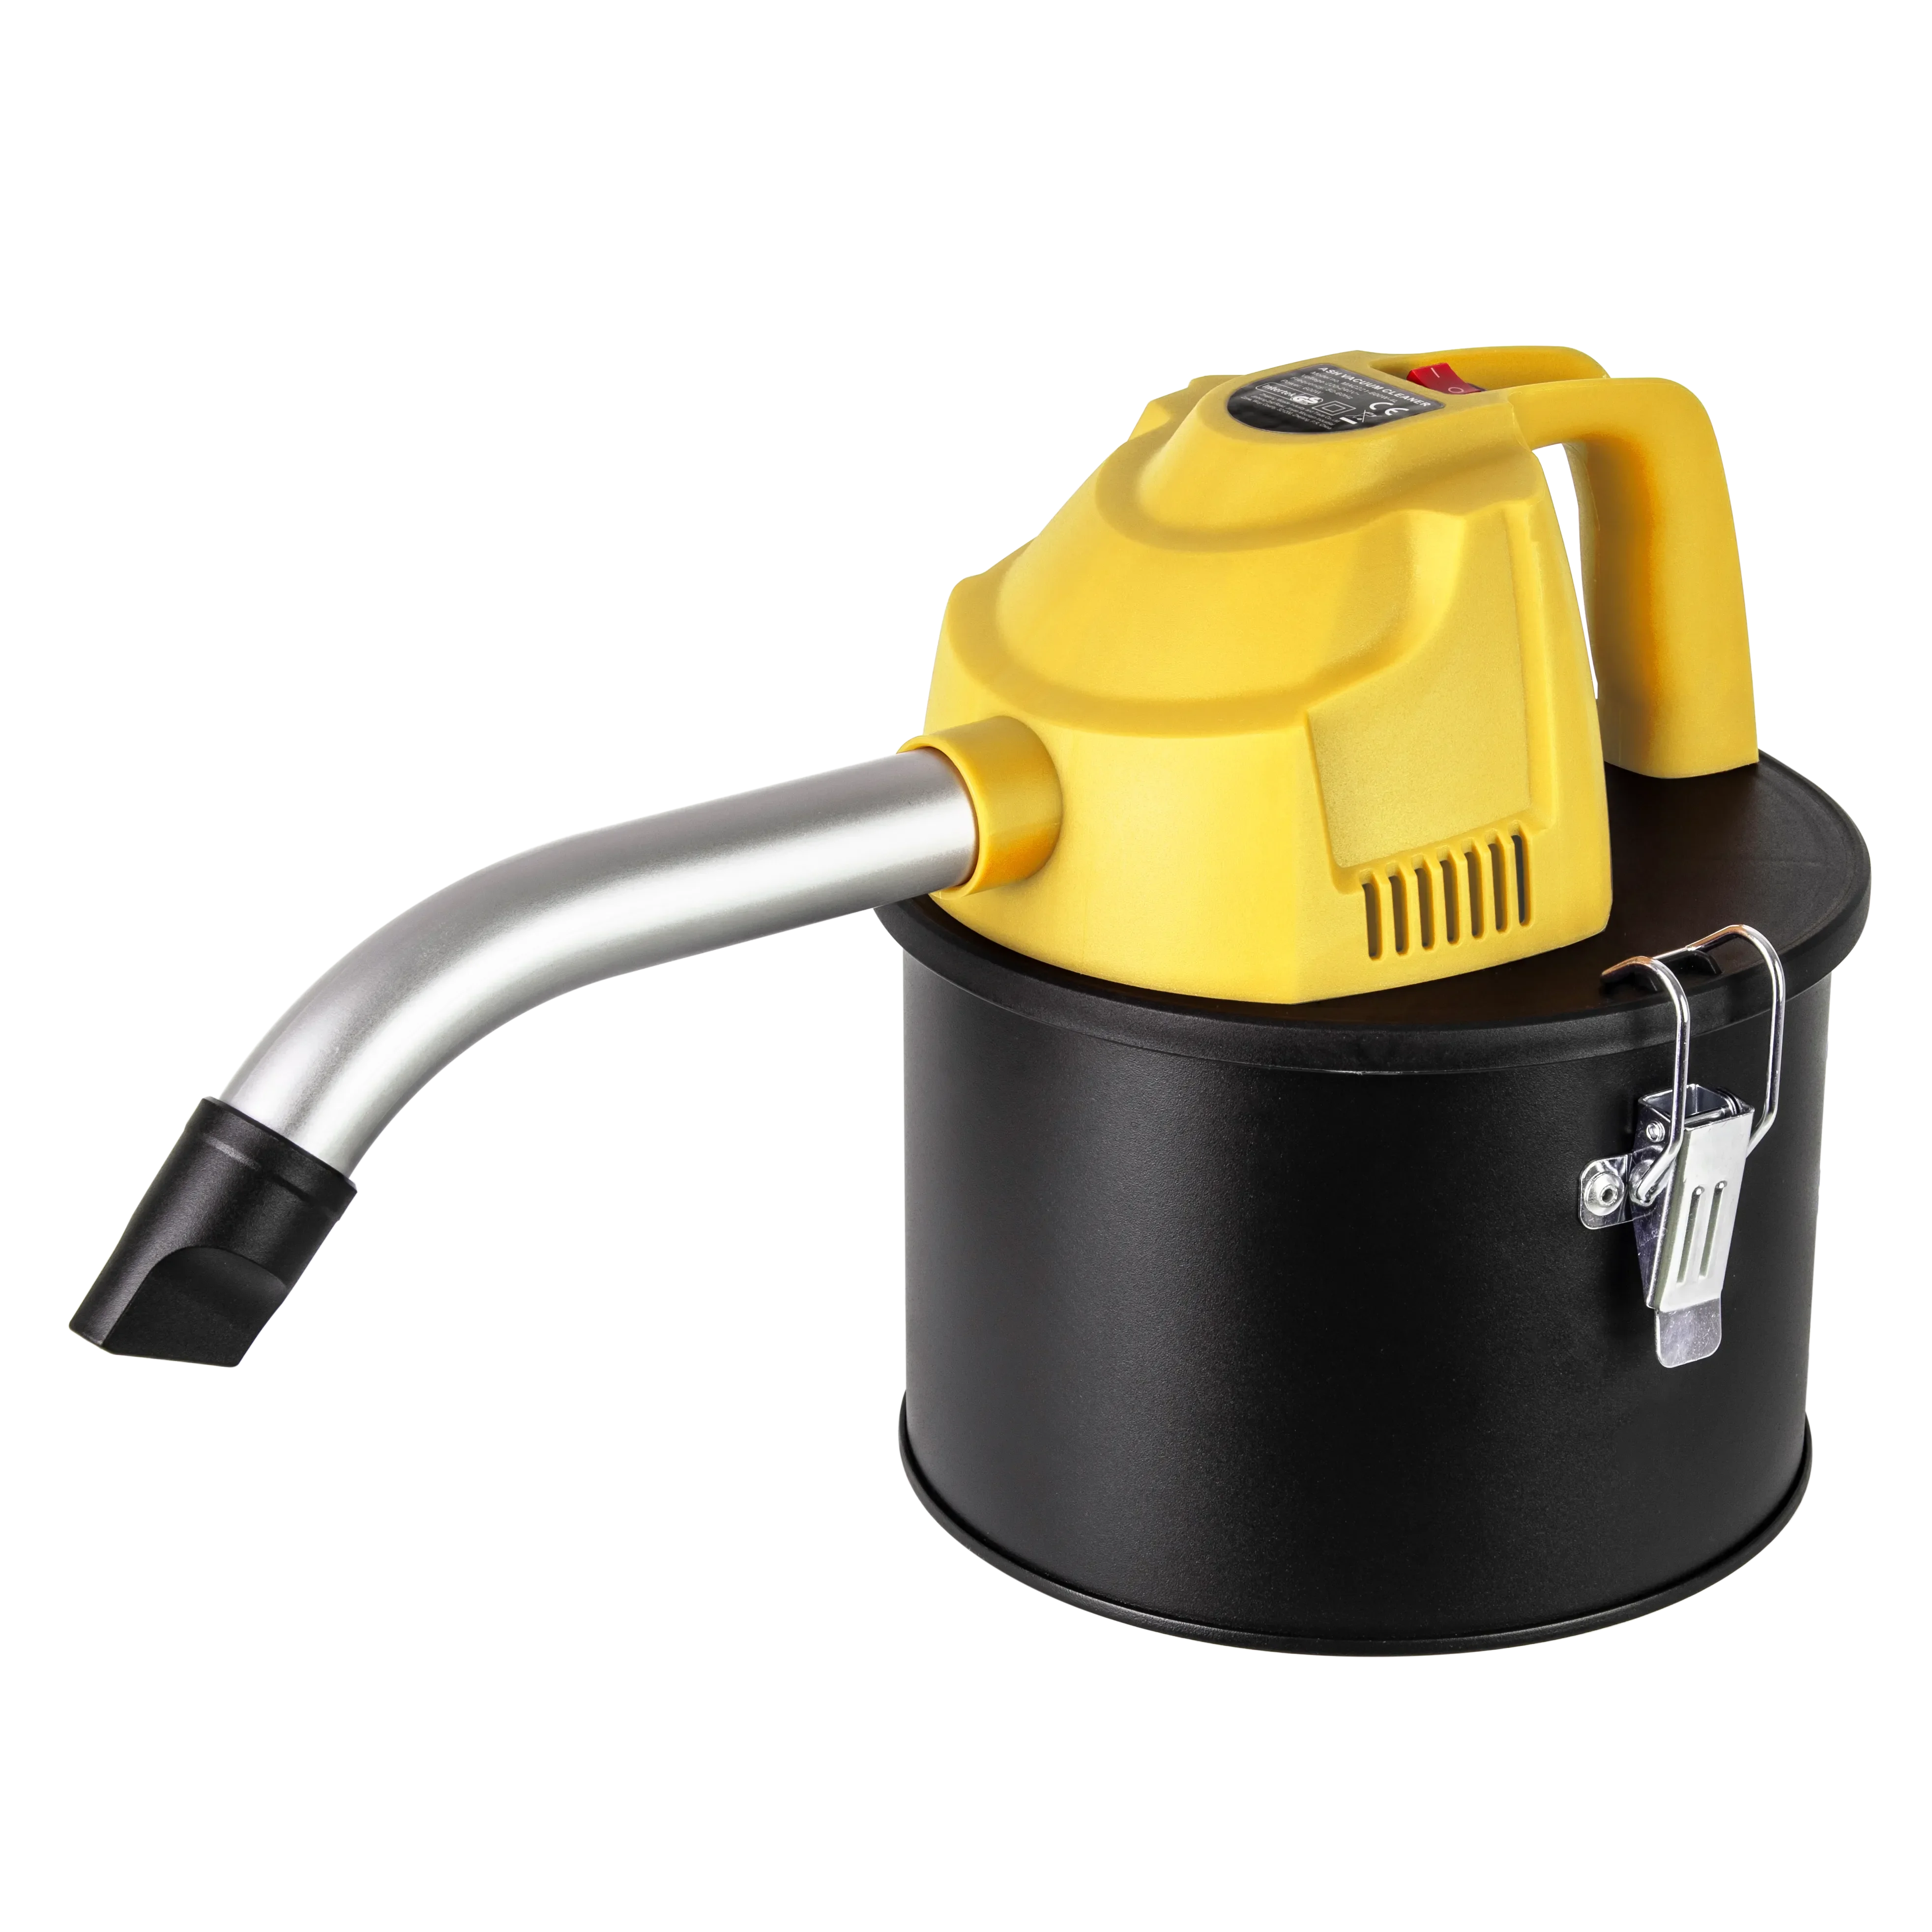 Ash vacuum cleaner 4L for fireplace - MAC221